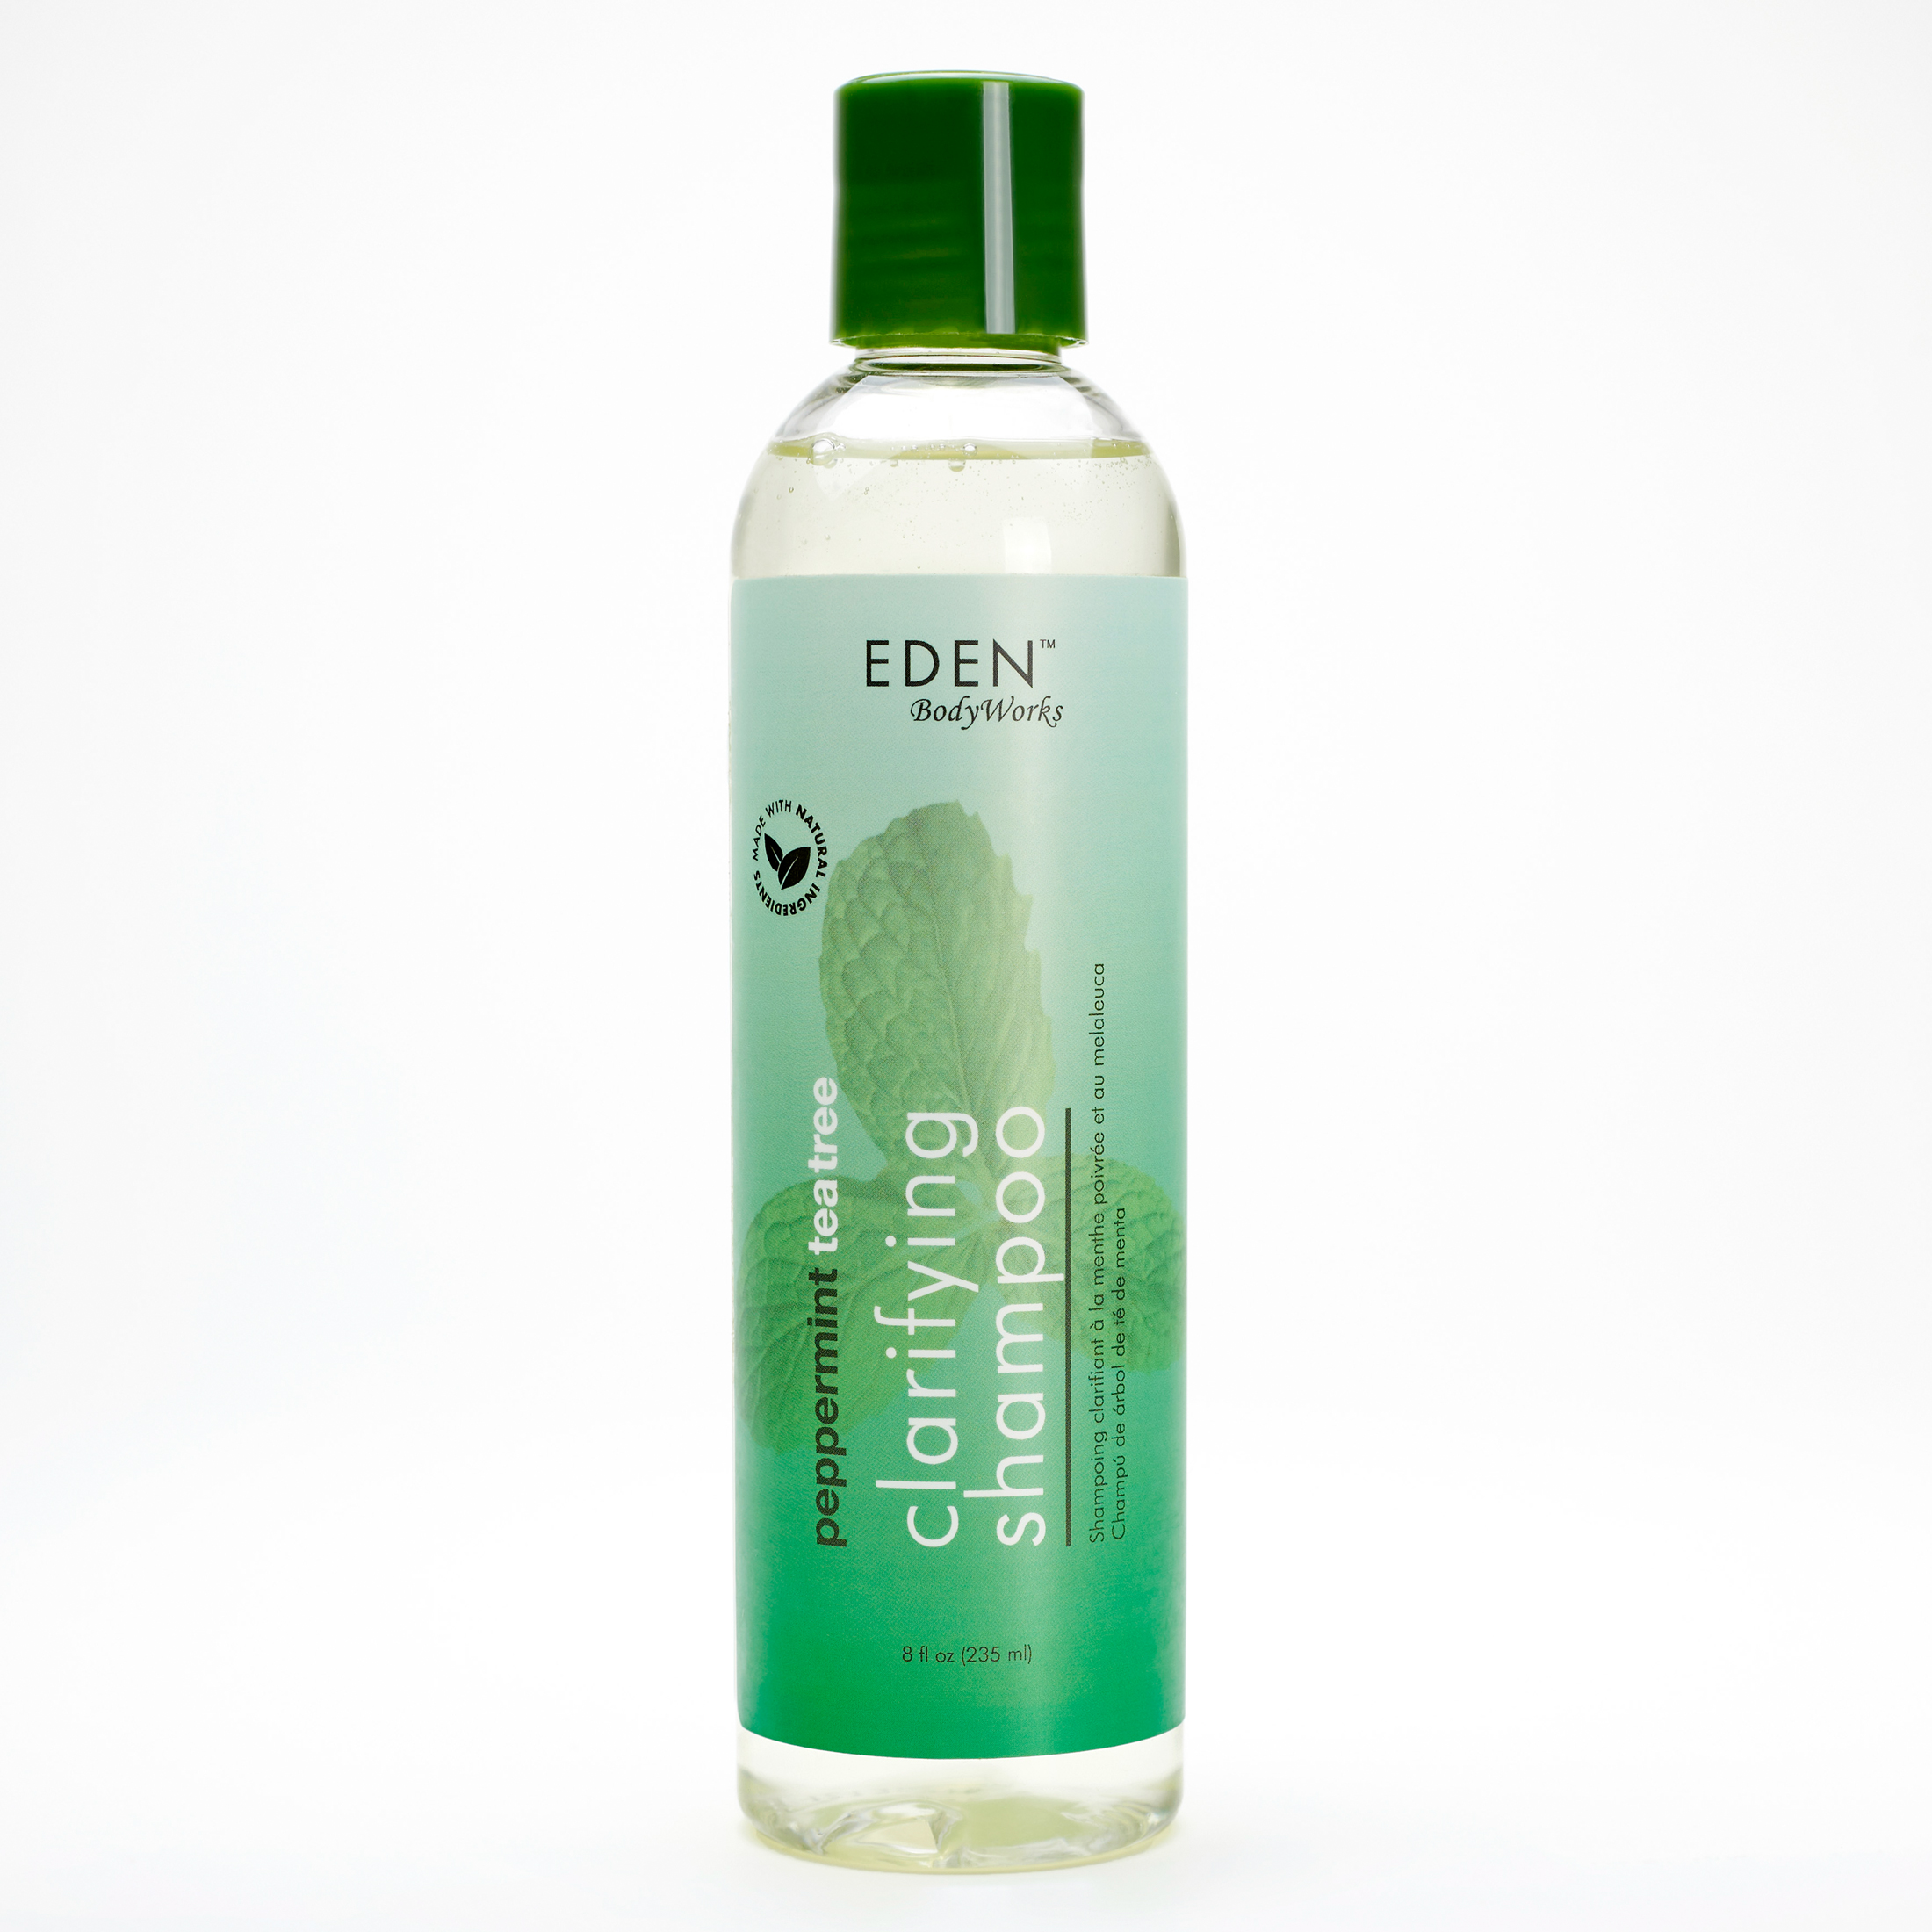 Eden BodyWorks Natural Clarifying Daily Shampoo with Peppermint & Tea Tree, 8 fl oz - image 1 of 7